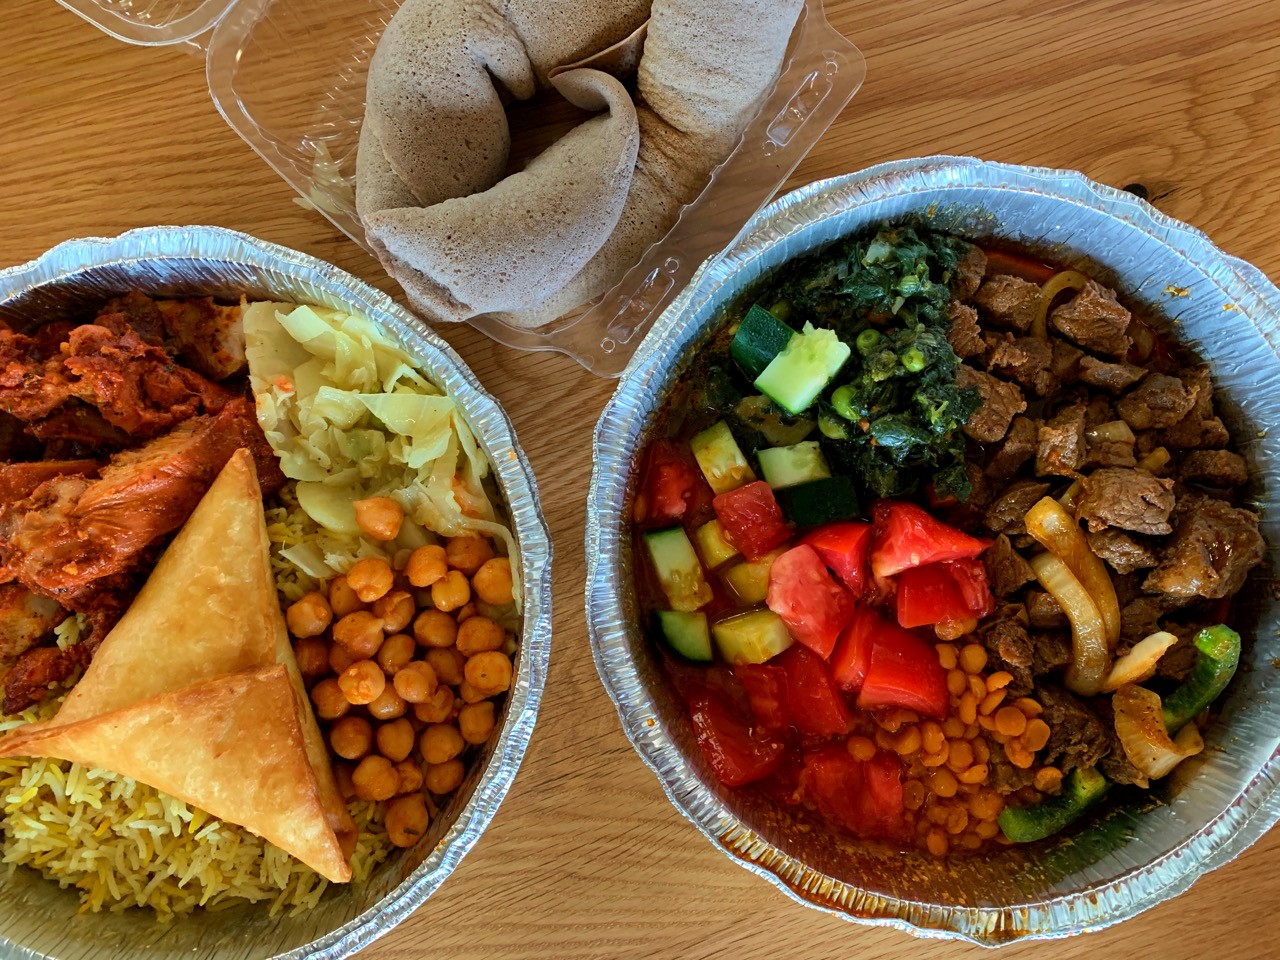 View of food bowls from Hoyo's Kitchen Somali restaurant in North Market